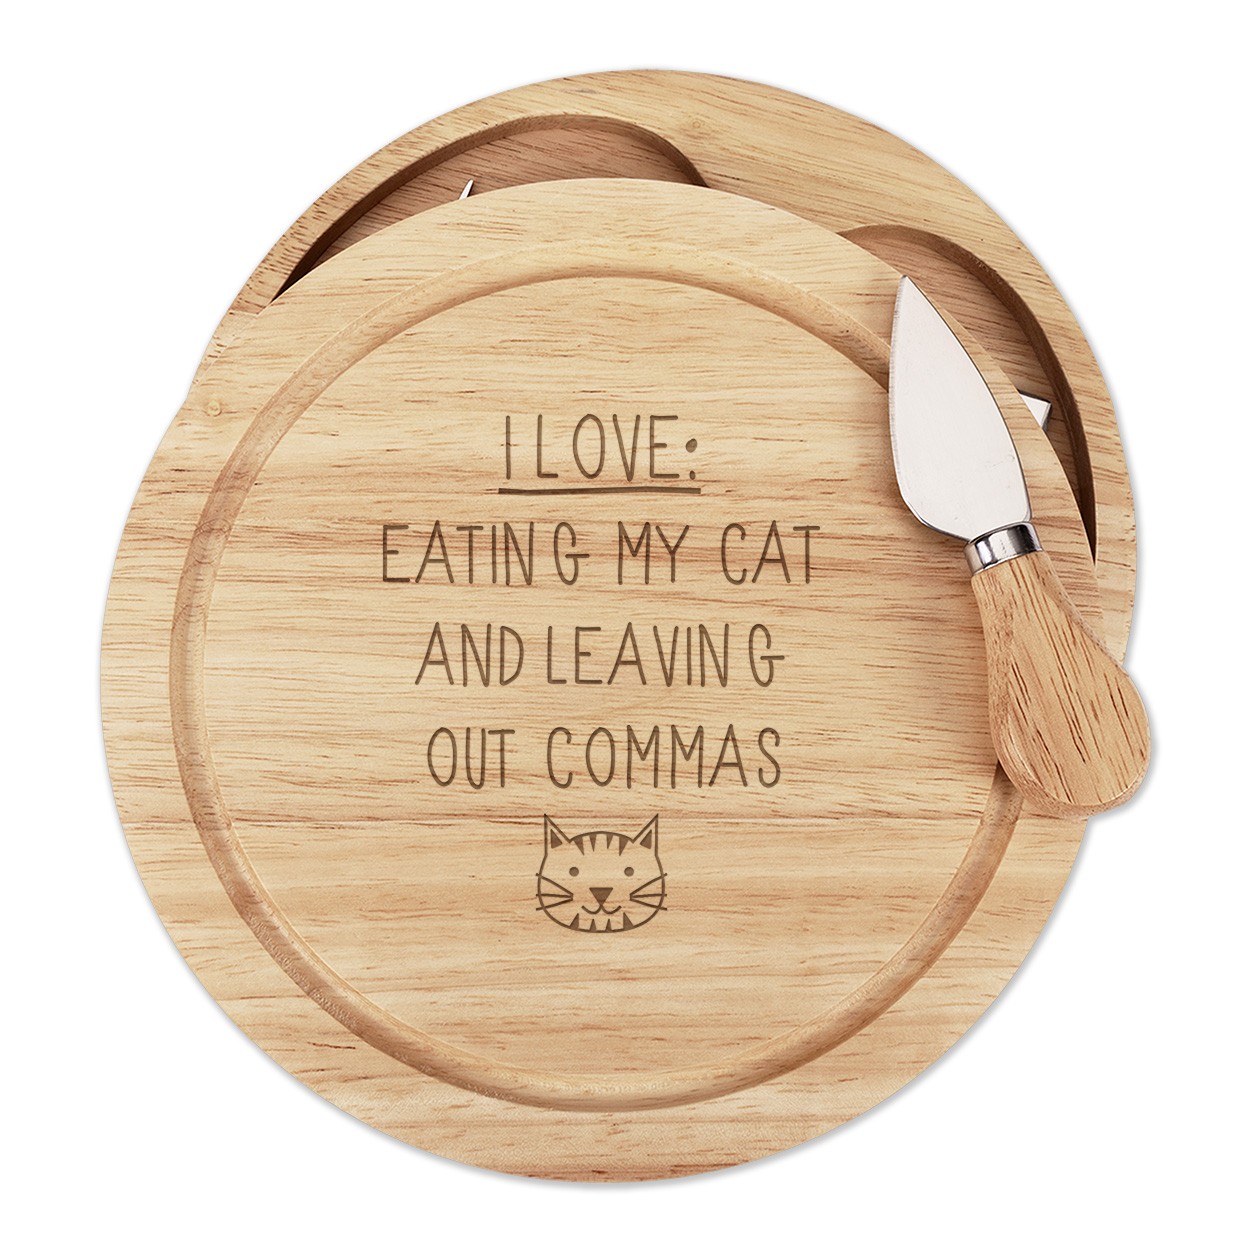 I Love Eating My Cat and Leaving Out Commas Wooden Cheese Board Set 4 Knives